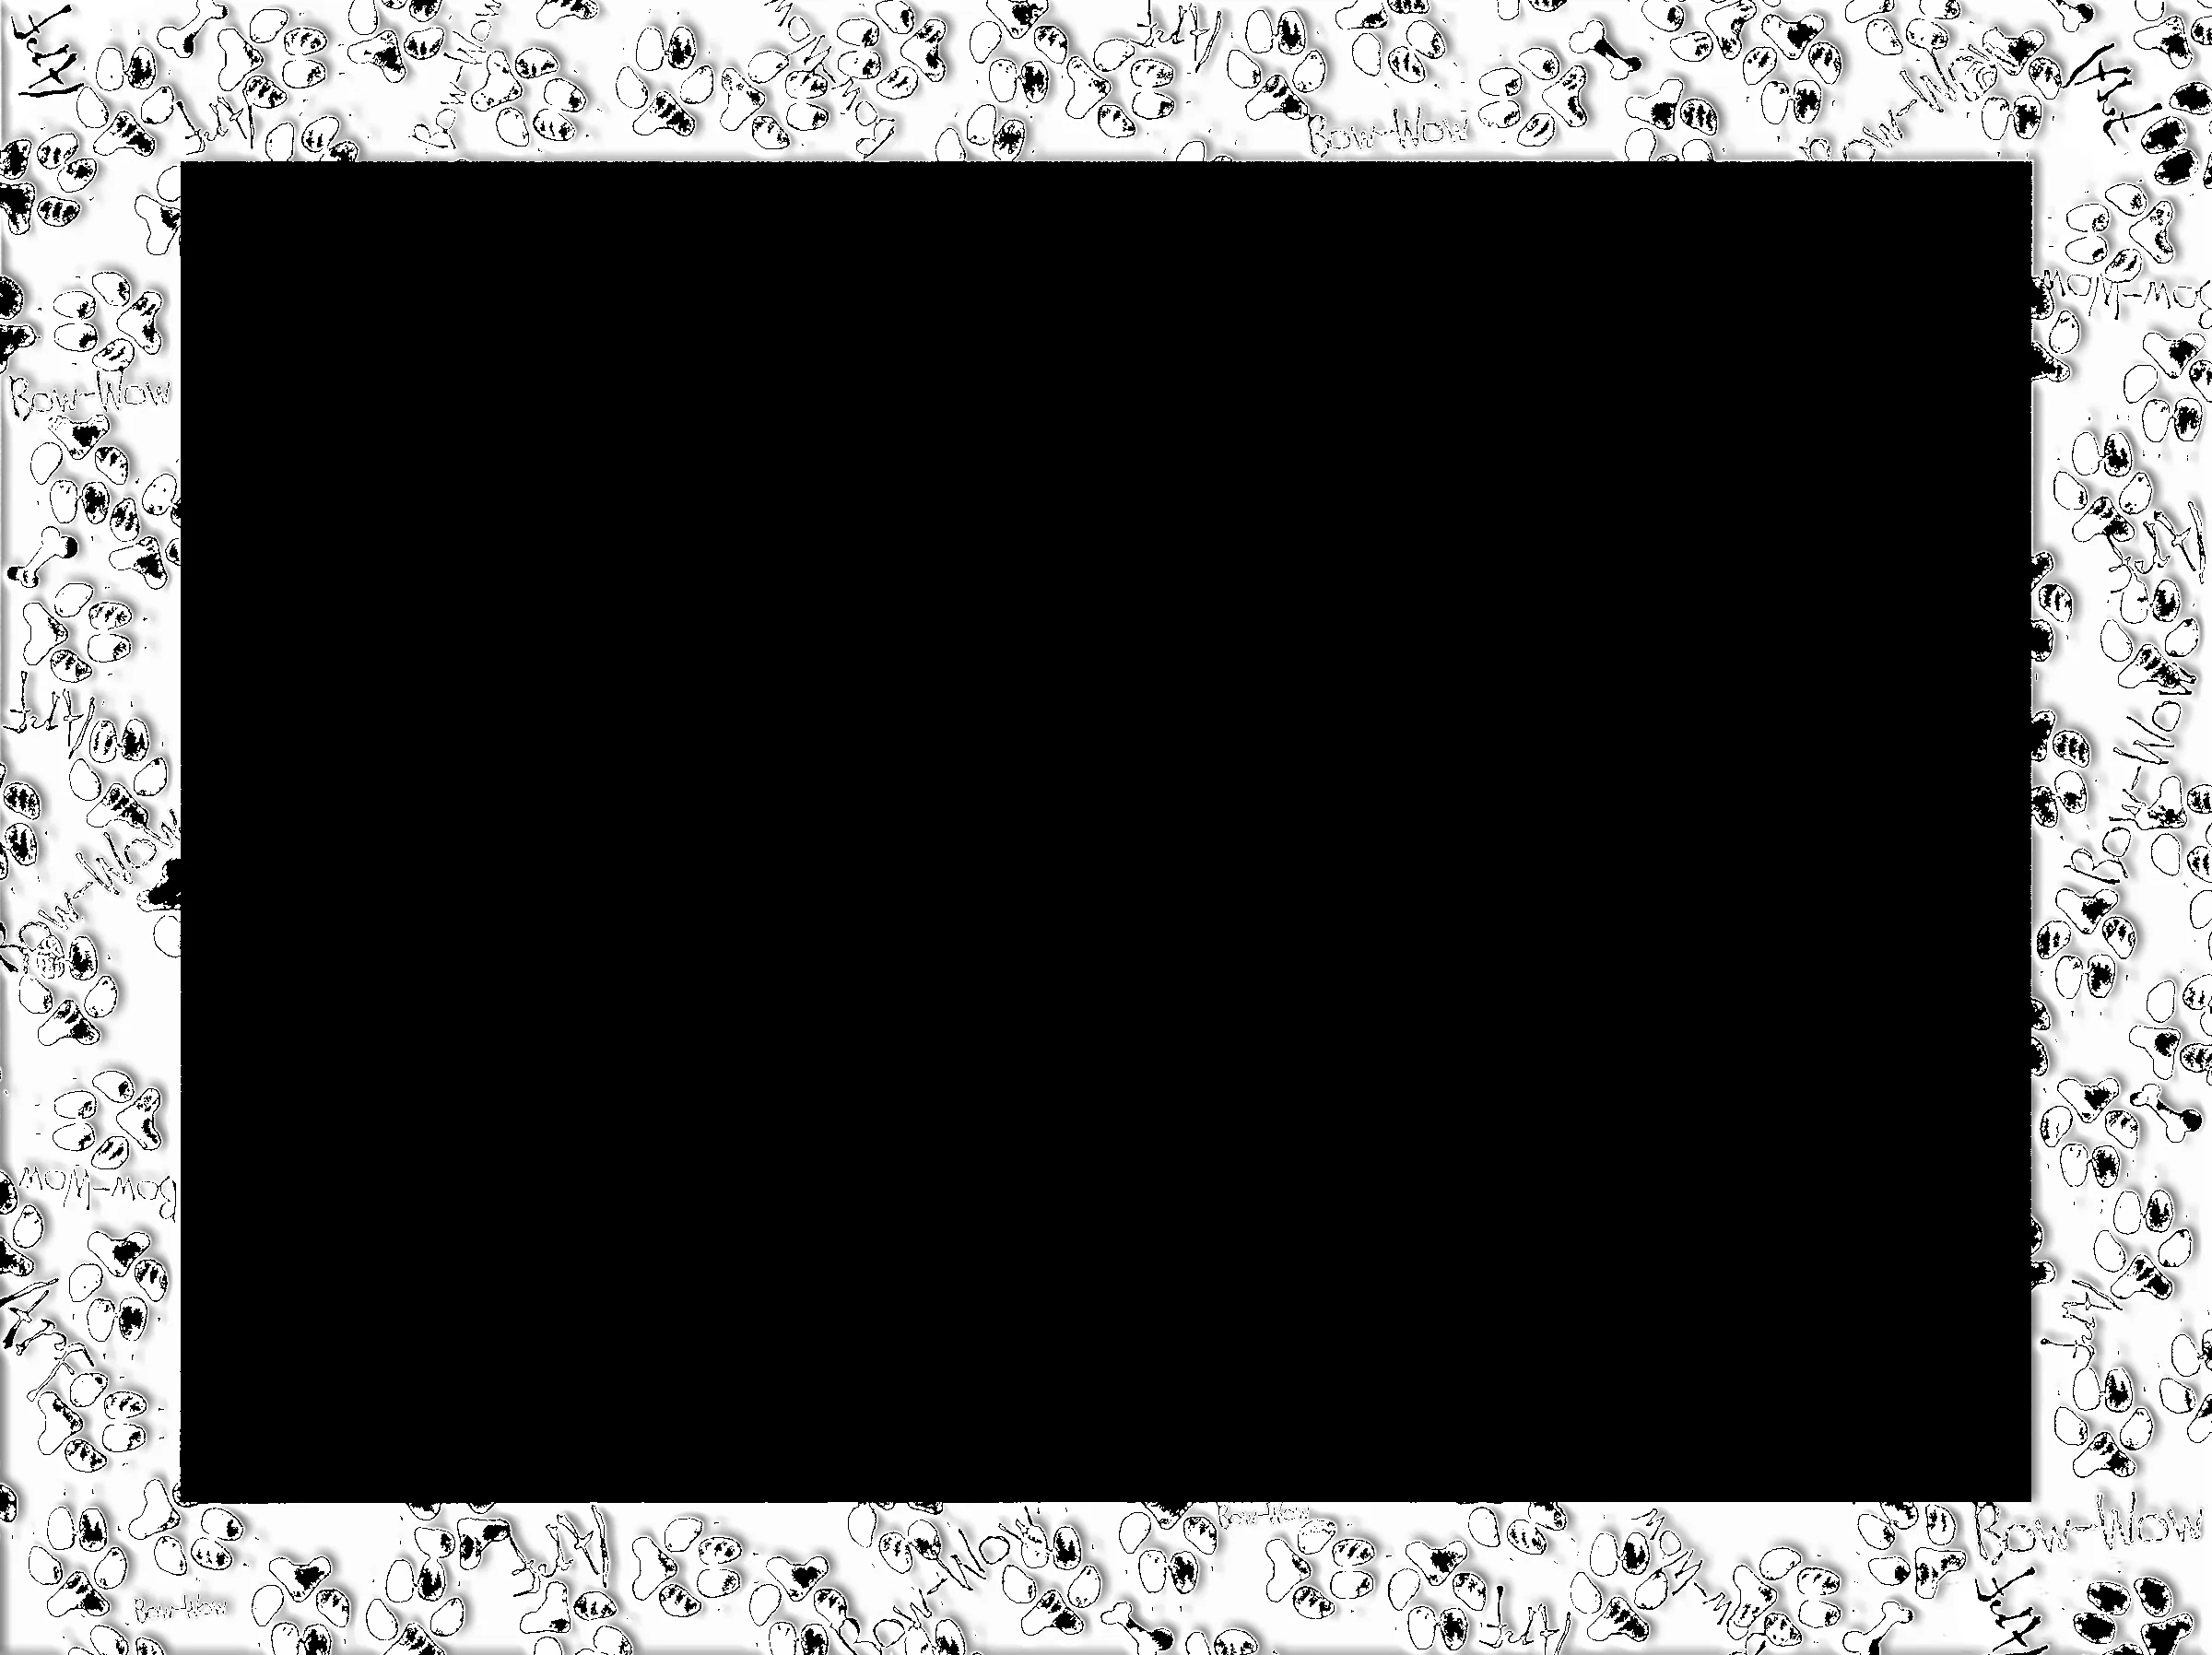 Free bow-wow PNG frame (white beveled) | Flickr - Photo Sharing!